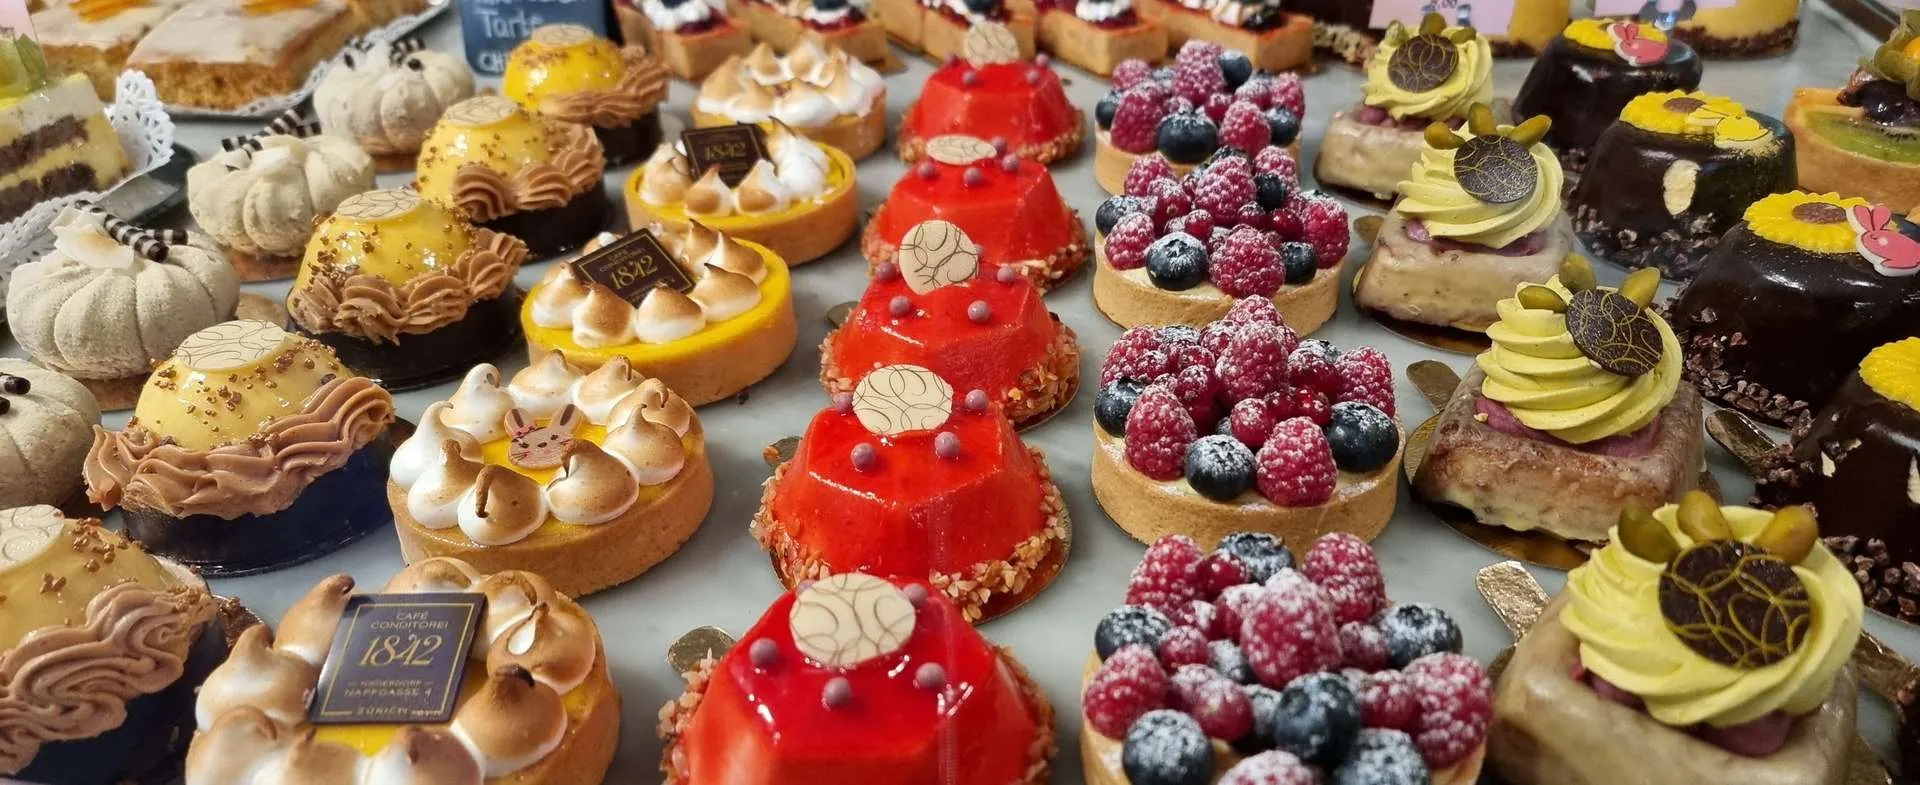 Bakery Schnell in Germany, europe | Baked Goods,Sweets - Country Helper